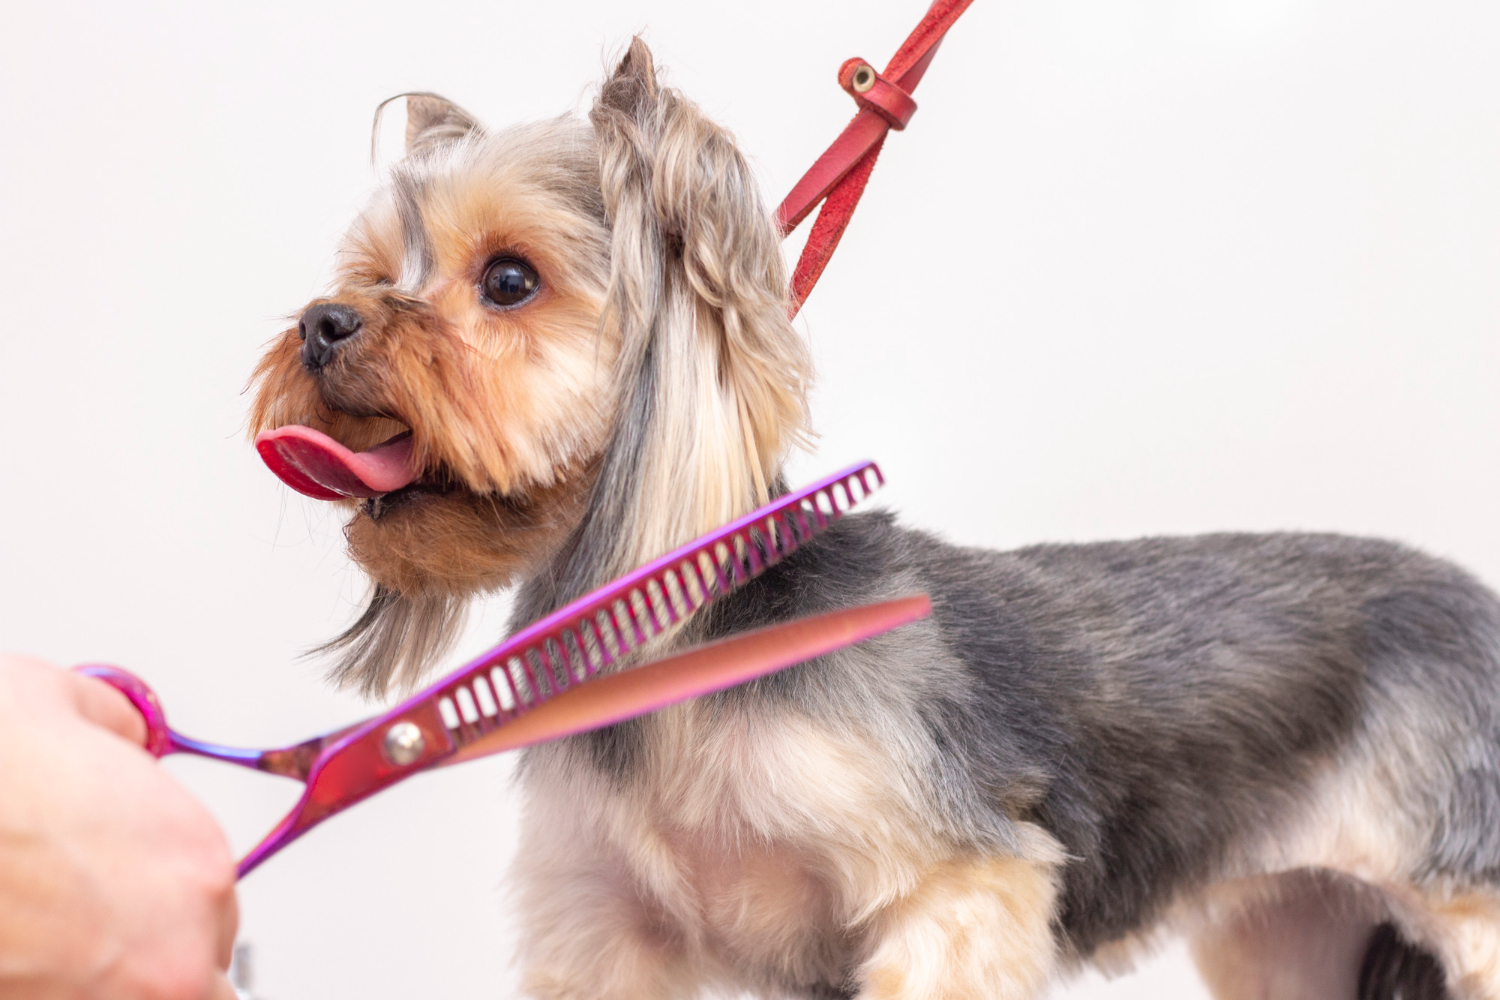 Mobile Groomer in Belvidere, IL - One on One Attention